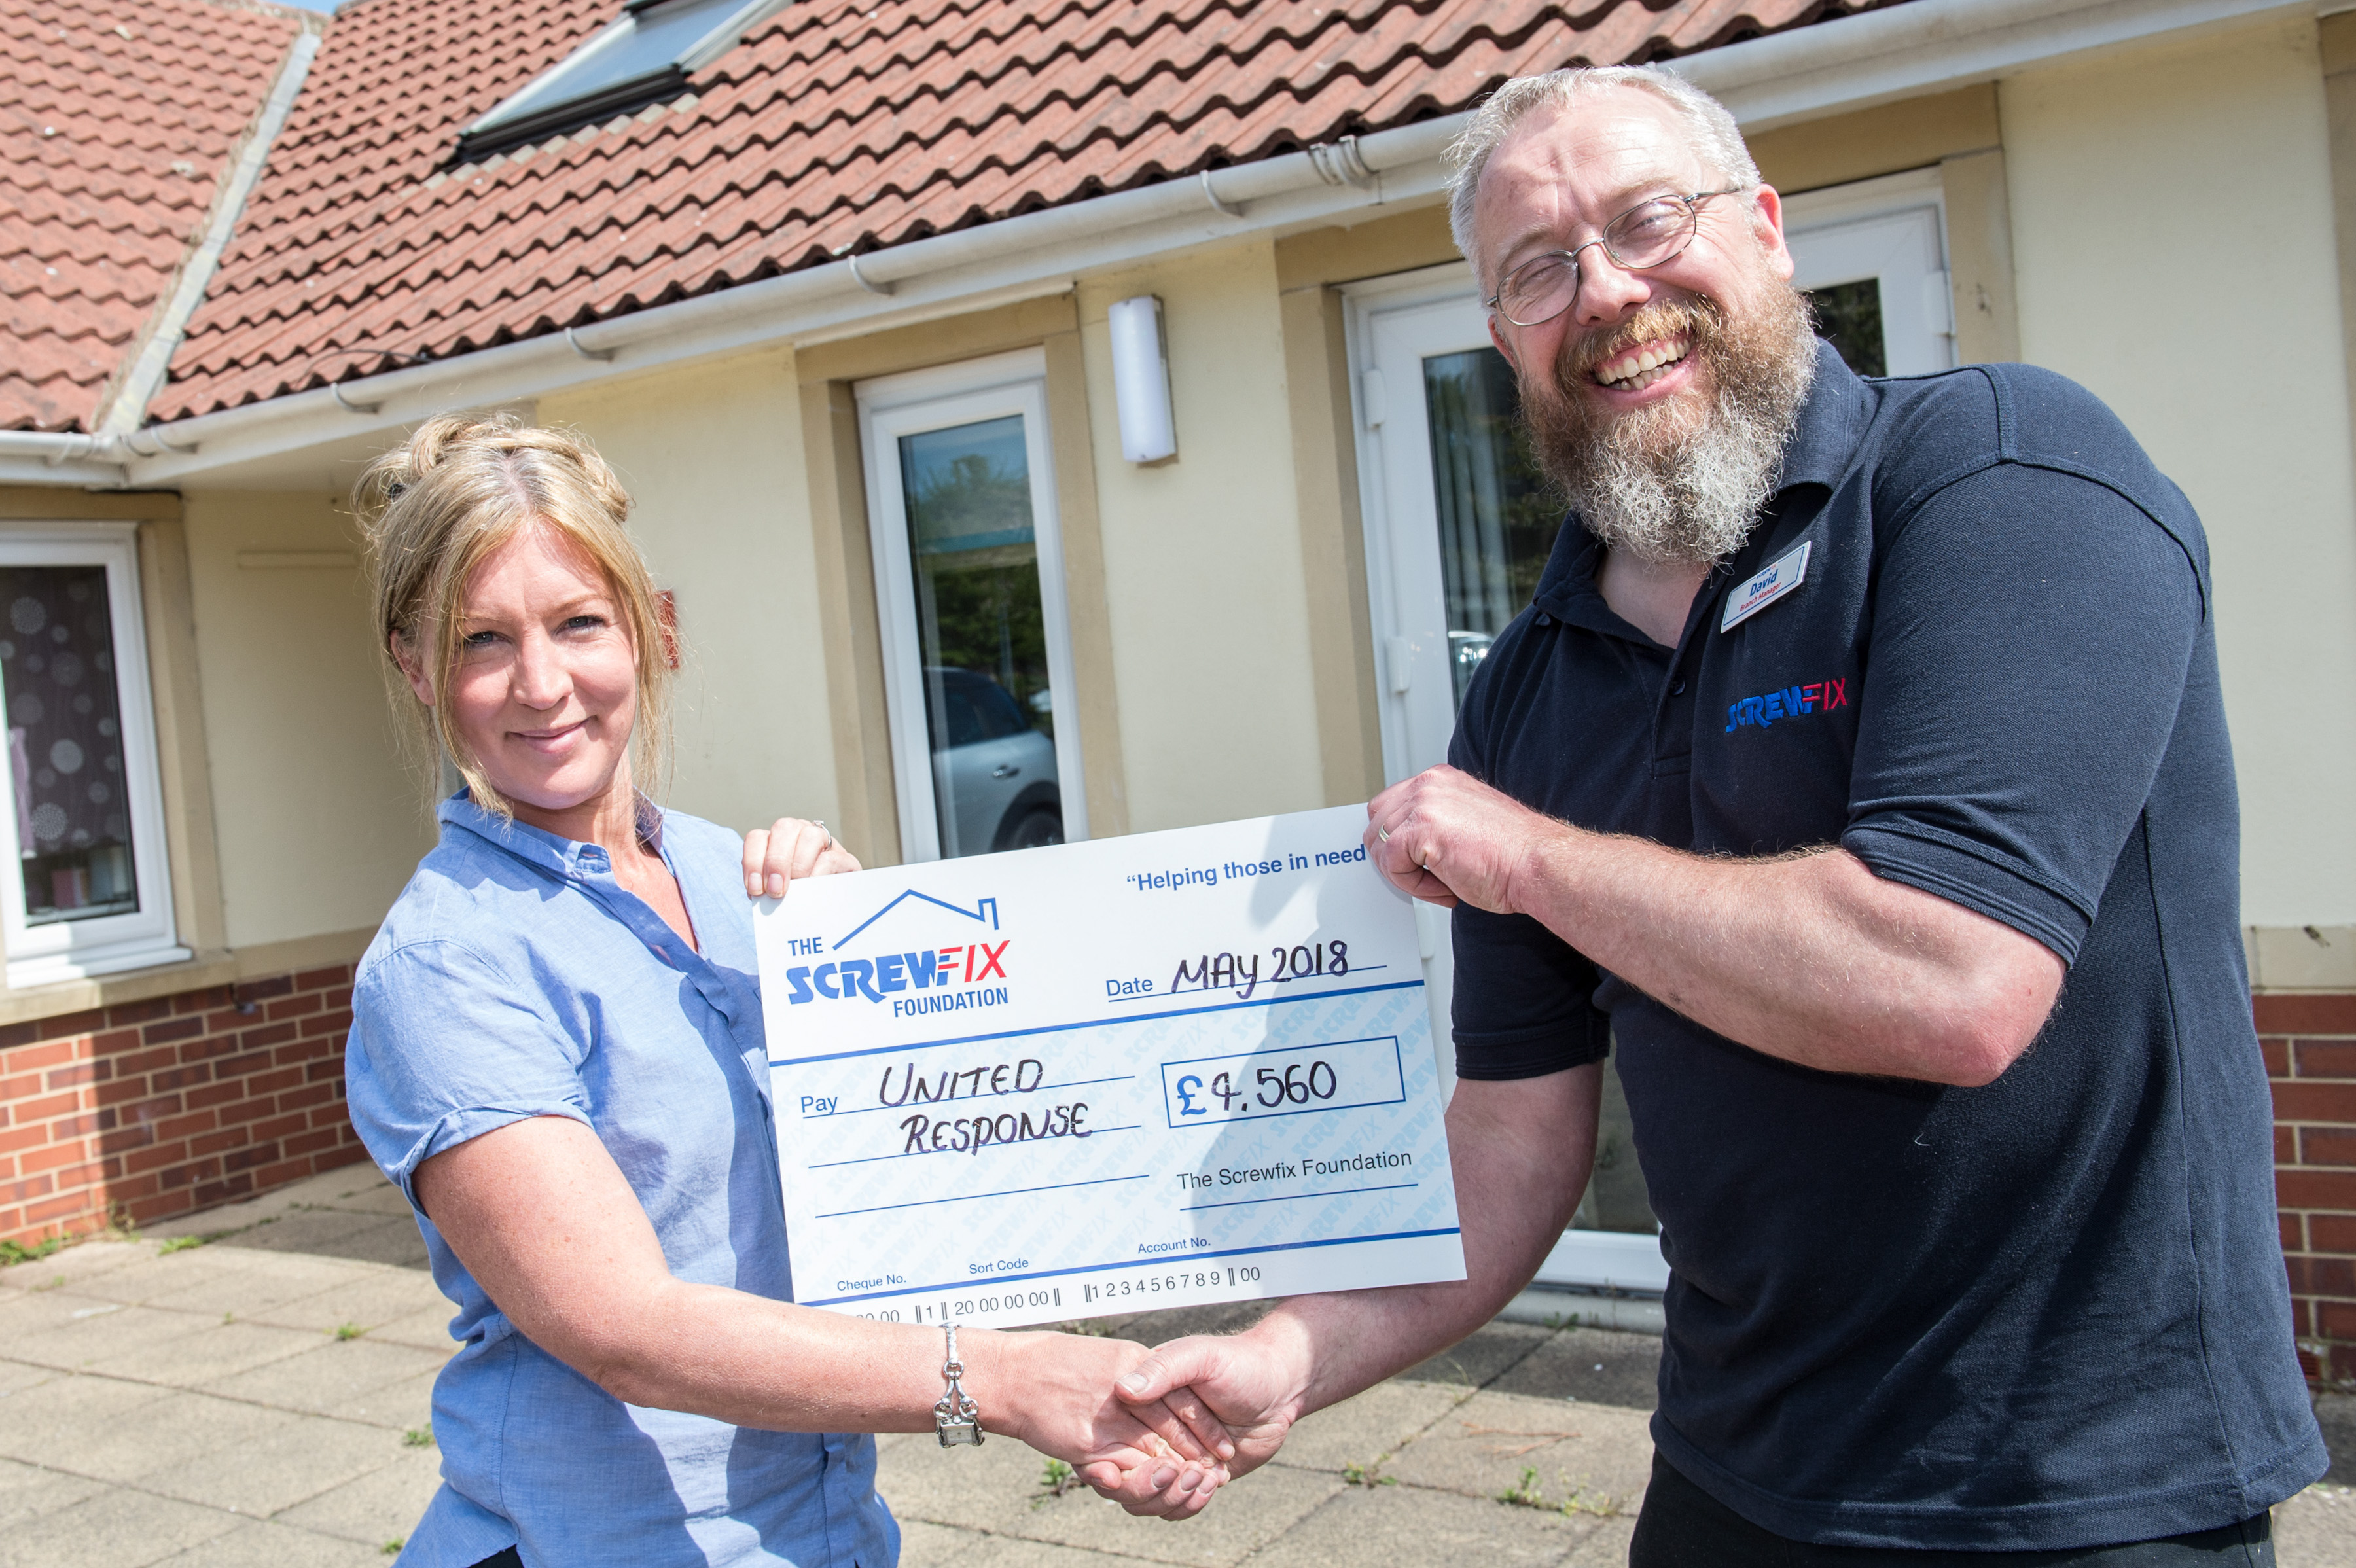 The charity United Response gets a helping hand from the Screwfix Foundation